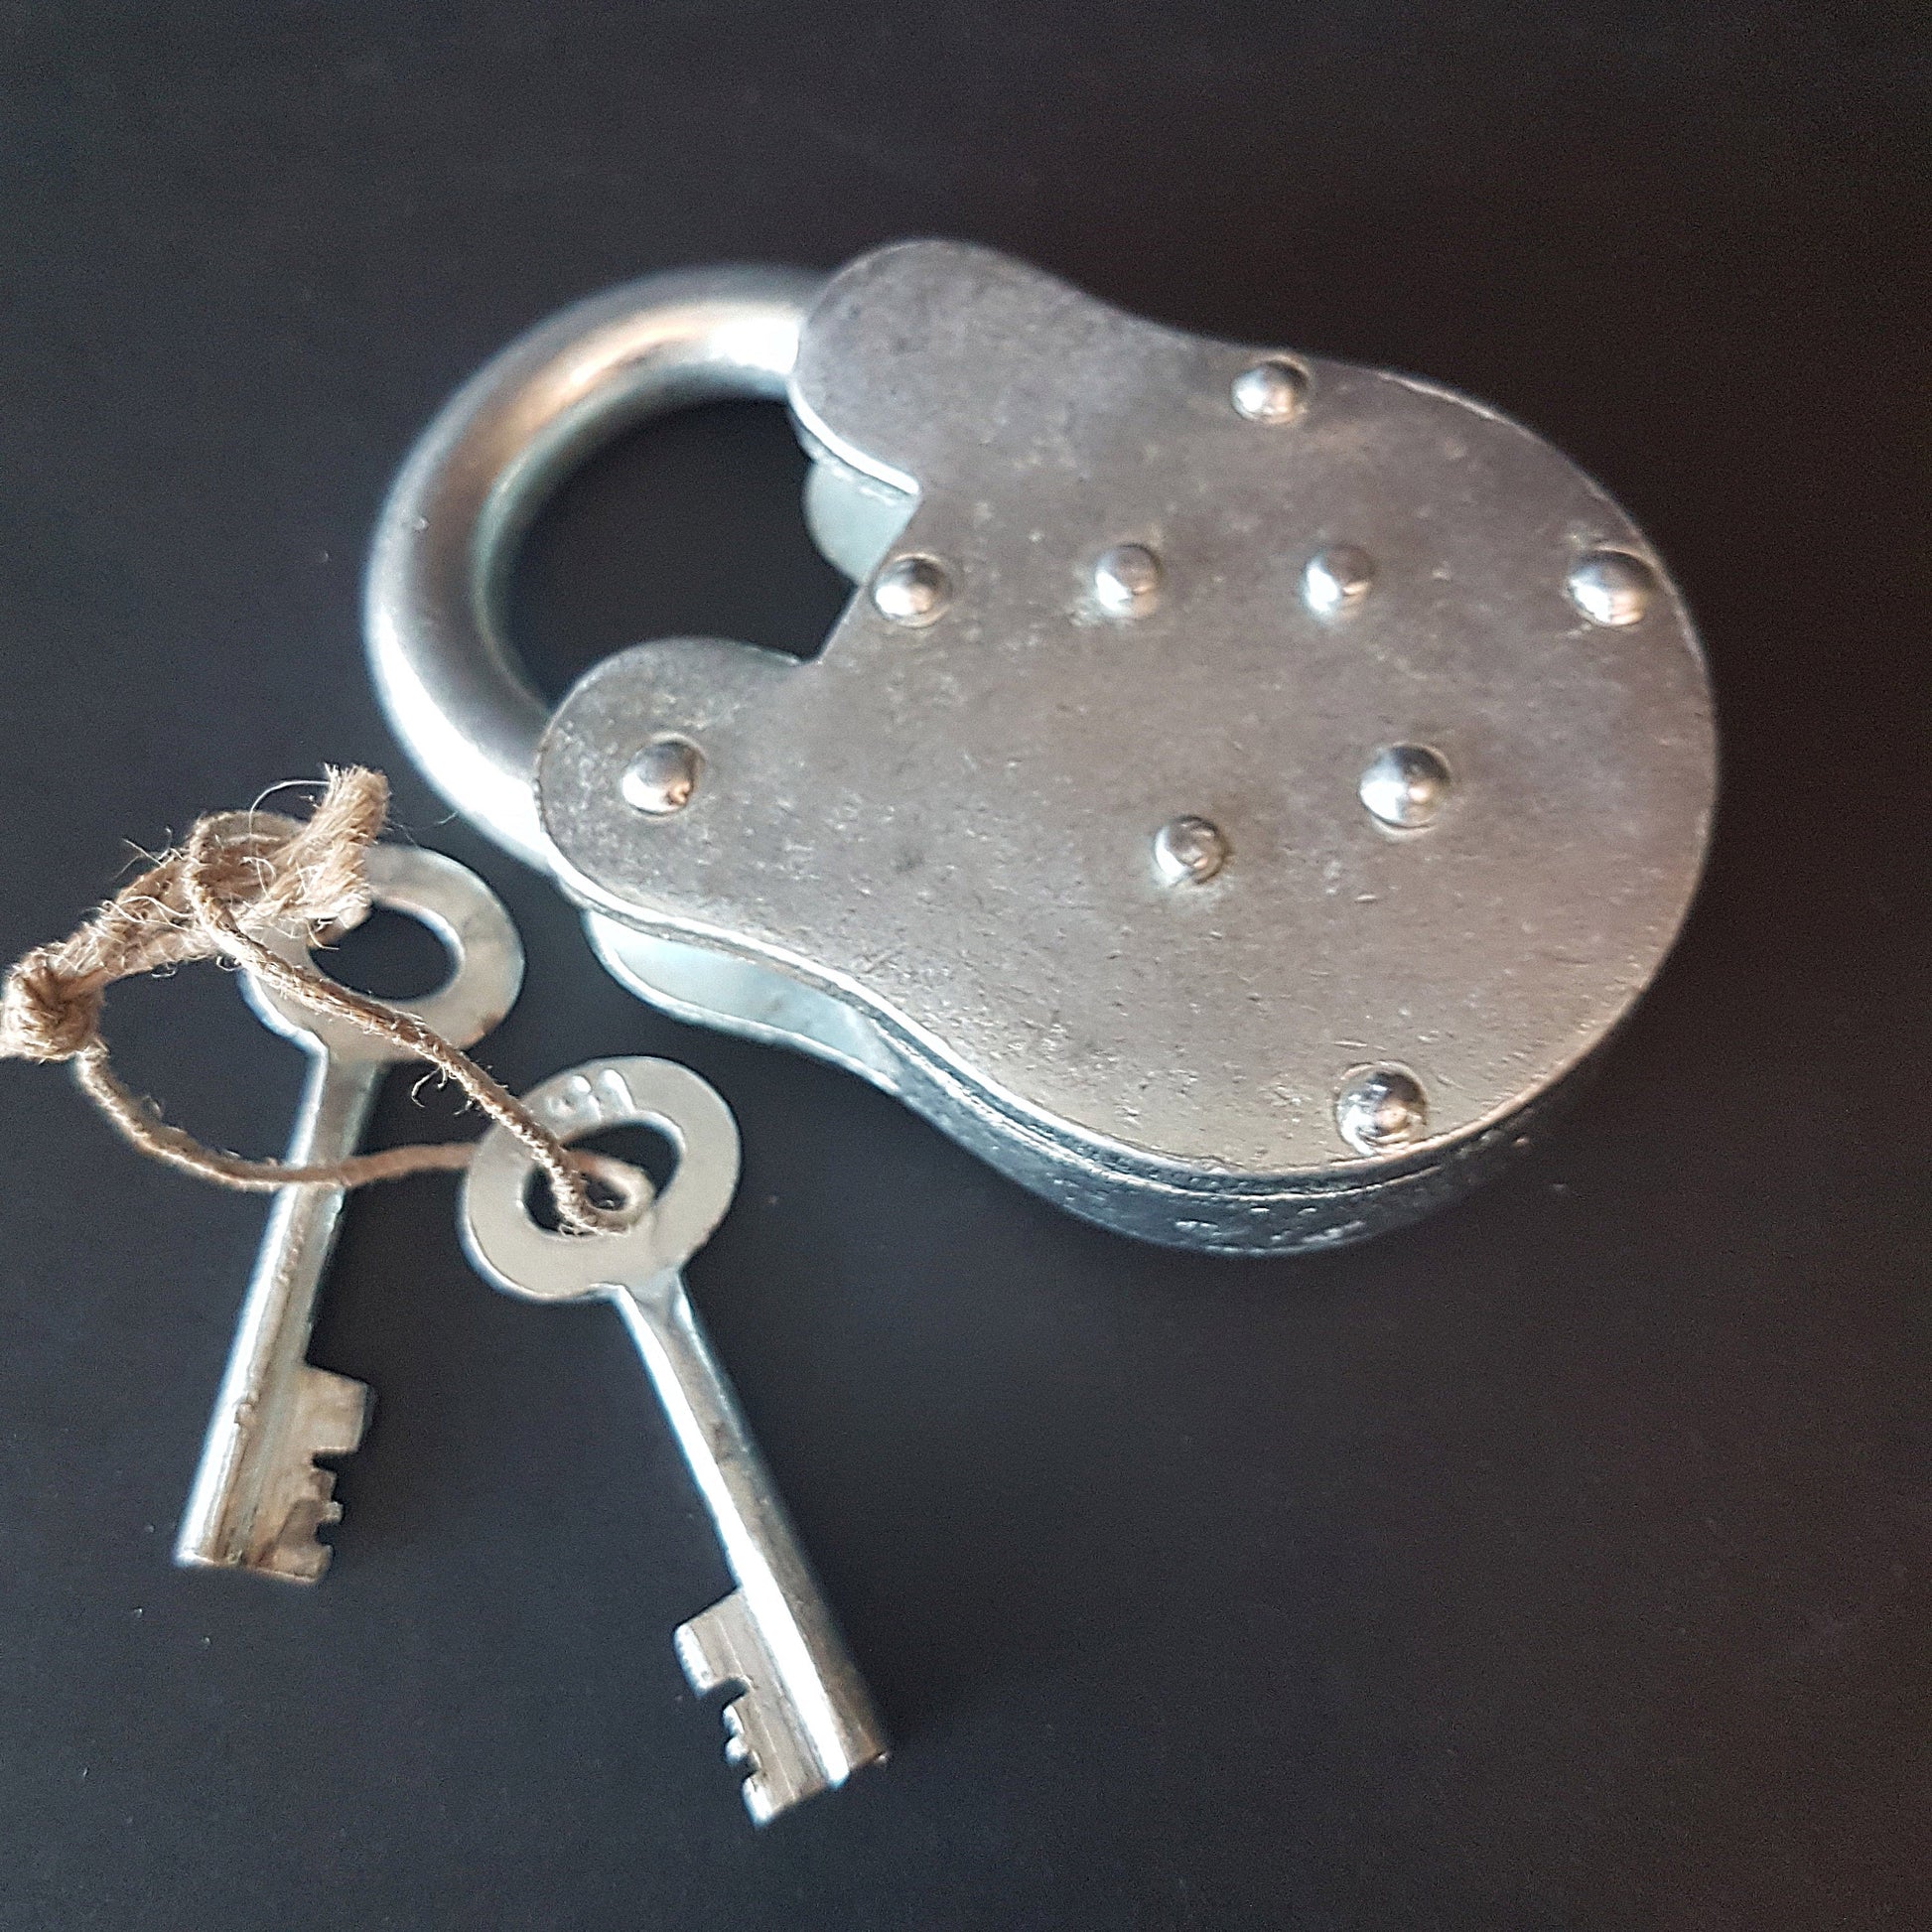 Heavy steel padlock 4.5 x 2.5 inches with 2 keys. Vintage silver polished finish. Antique nautical design. Multi purpose locking device. - Vintage India Ca